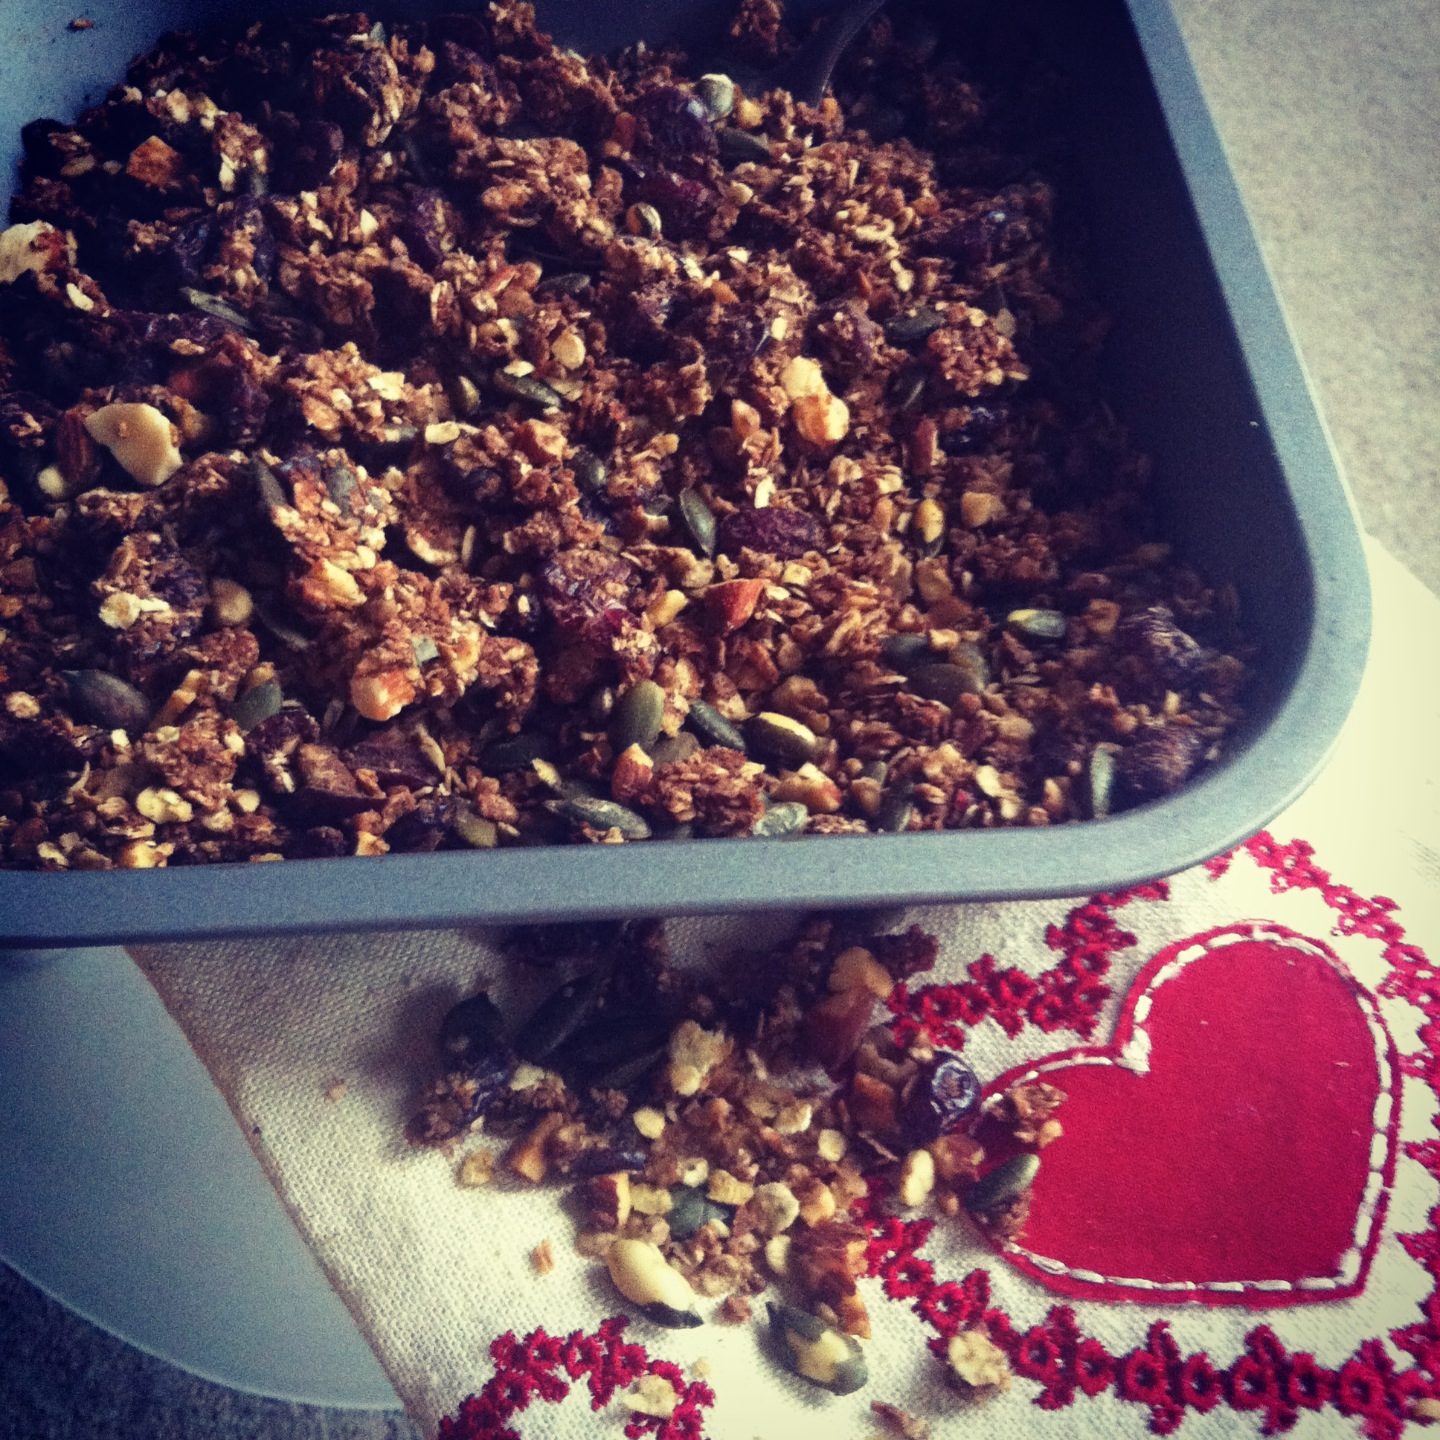 Crunchy Granola with Chocolate Protein (optional!)